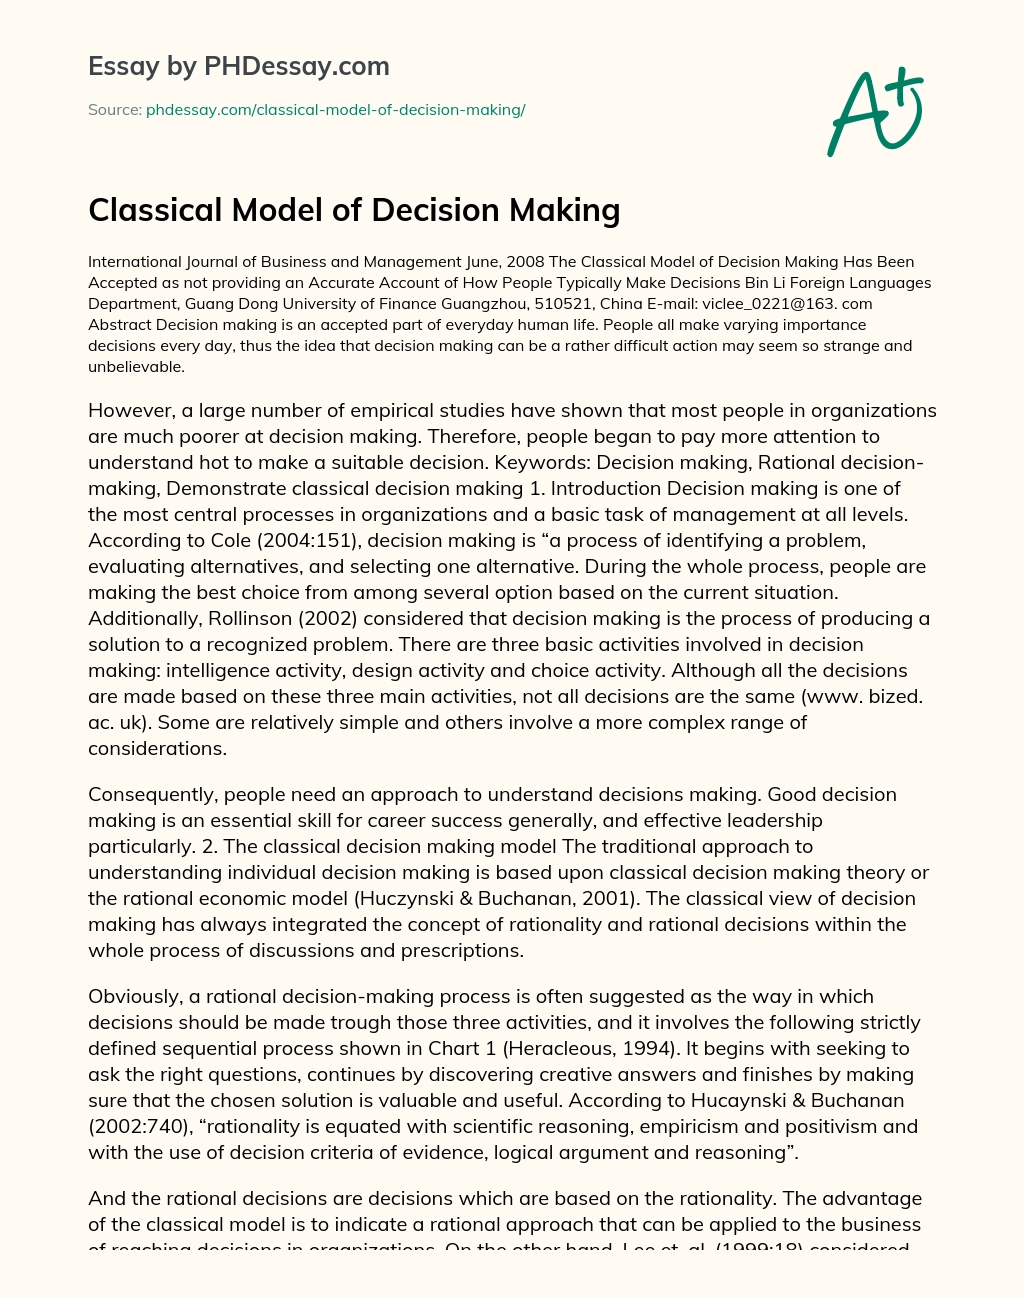 Classical Model of Decision Making essay